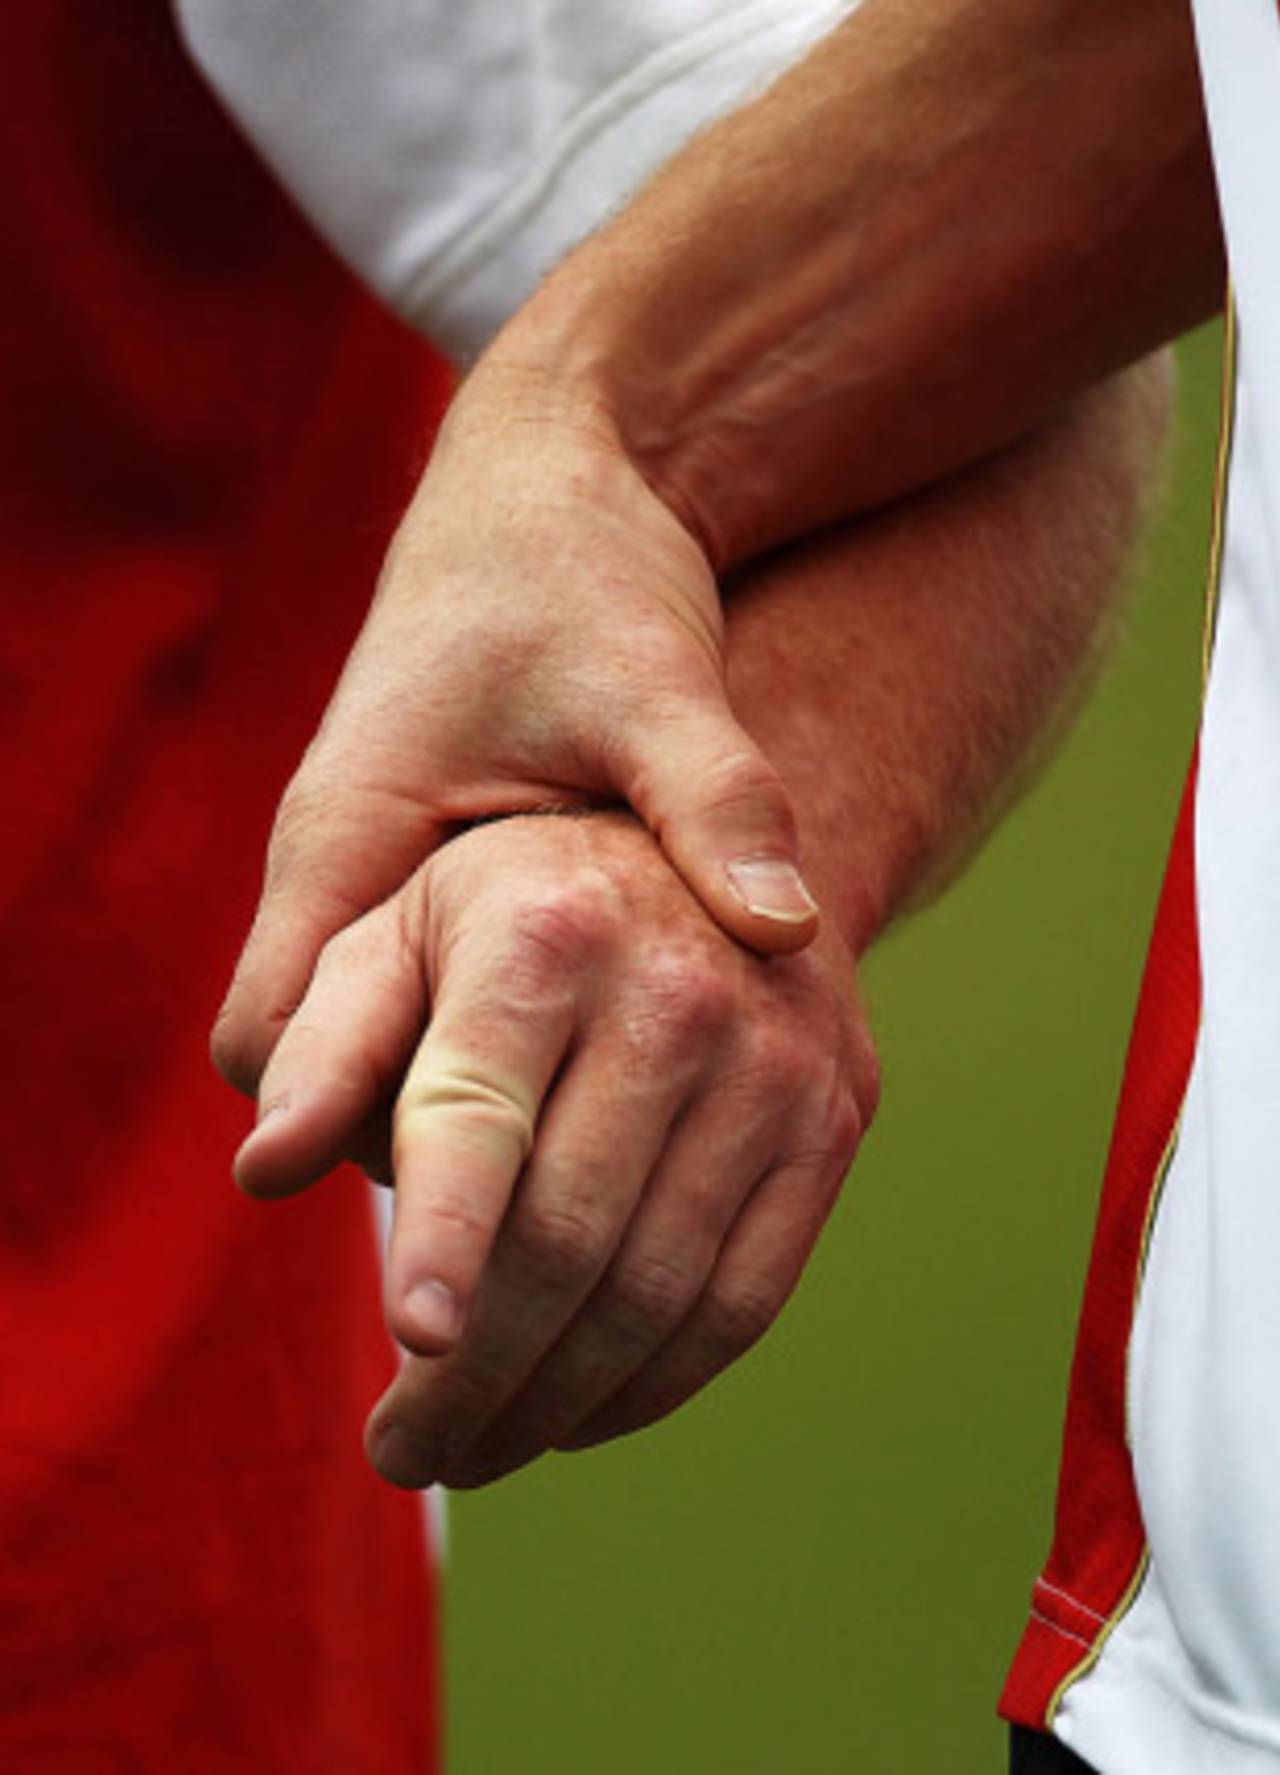 Paul Collingwood suffered a dislocated finger during practice on the fourth morning, South Africa v England, 2nd Test, Durban, December 29, 2009 